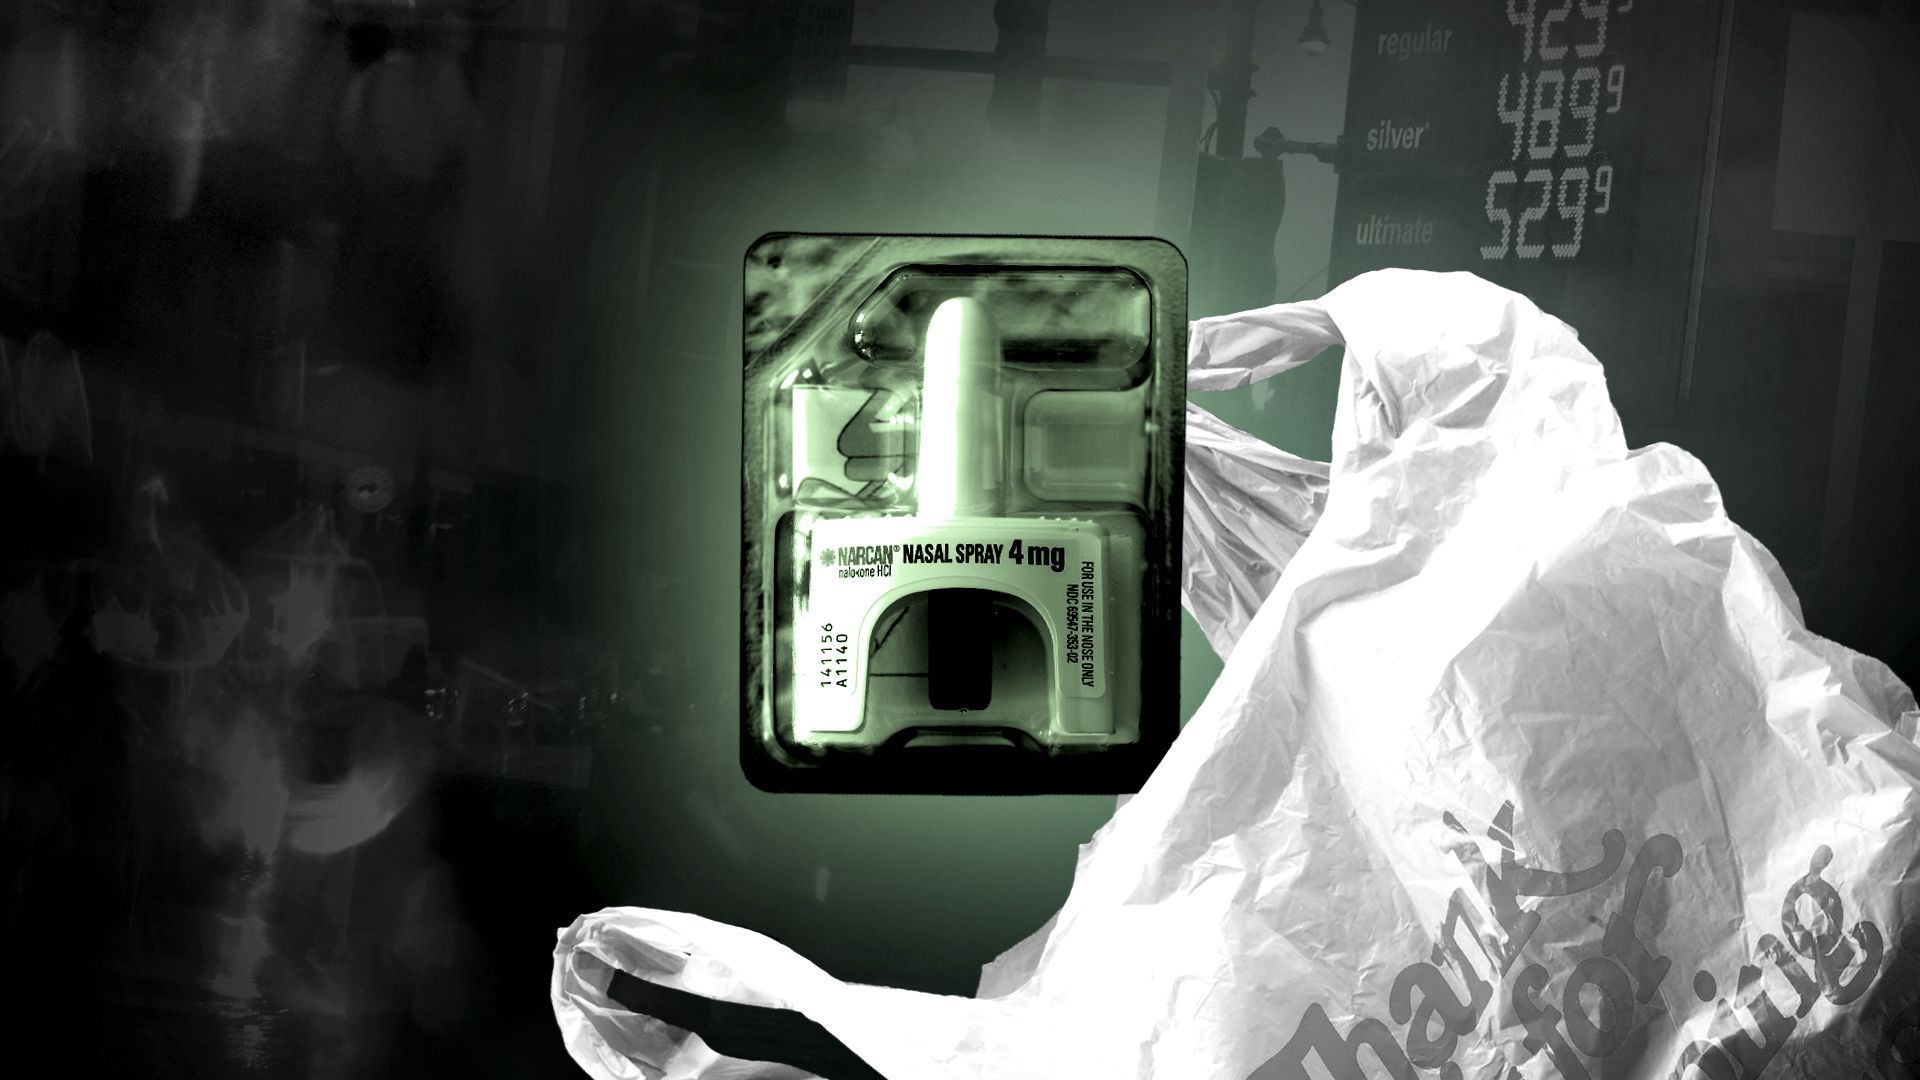 Photo illustration collage of a Narcan package falling out of a plastic shopping bag in front of a background showing a gas station